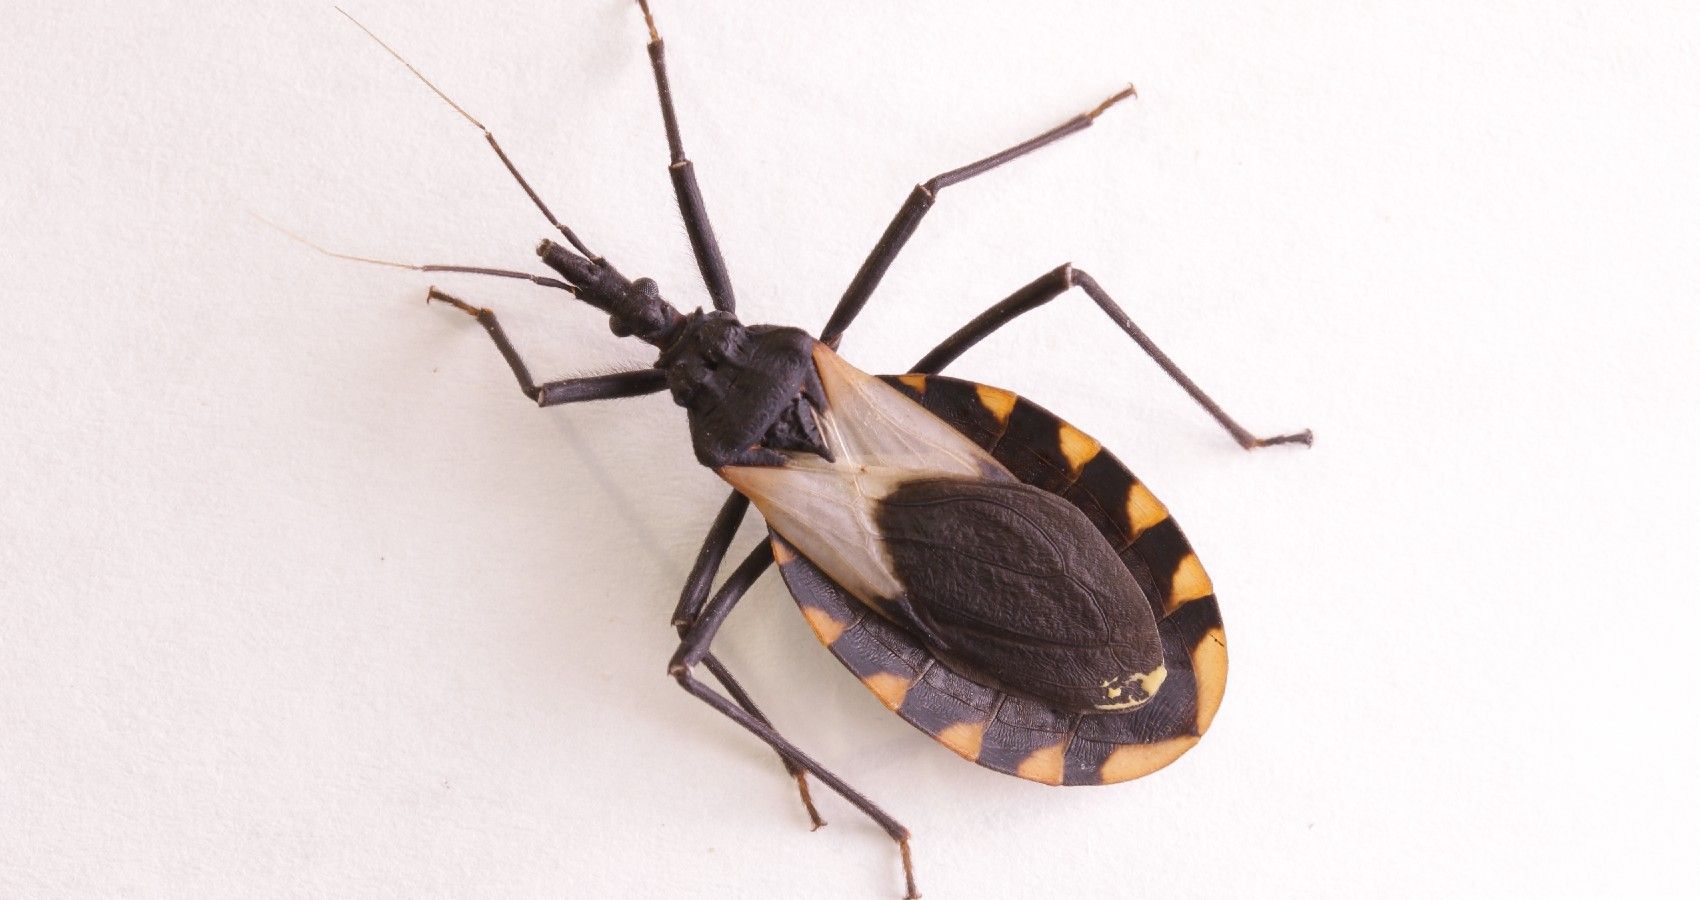 Every Year 8,000 Babies Are Born With Chagas Disease